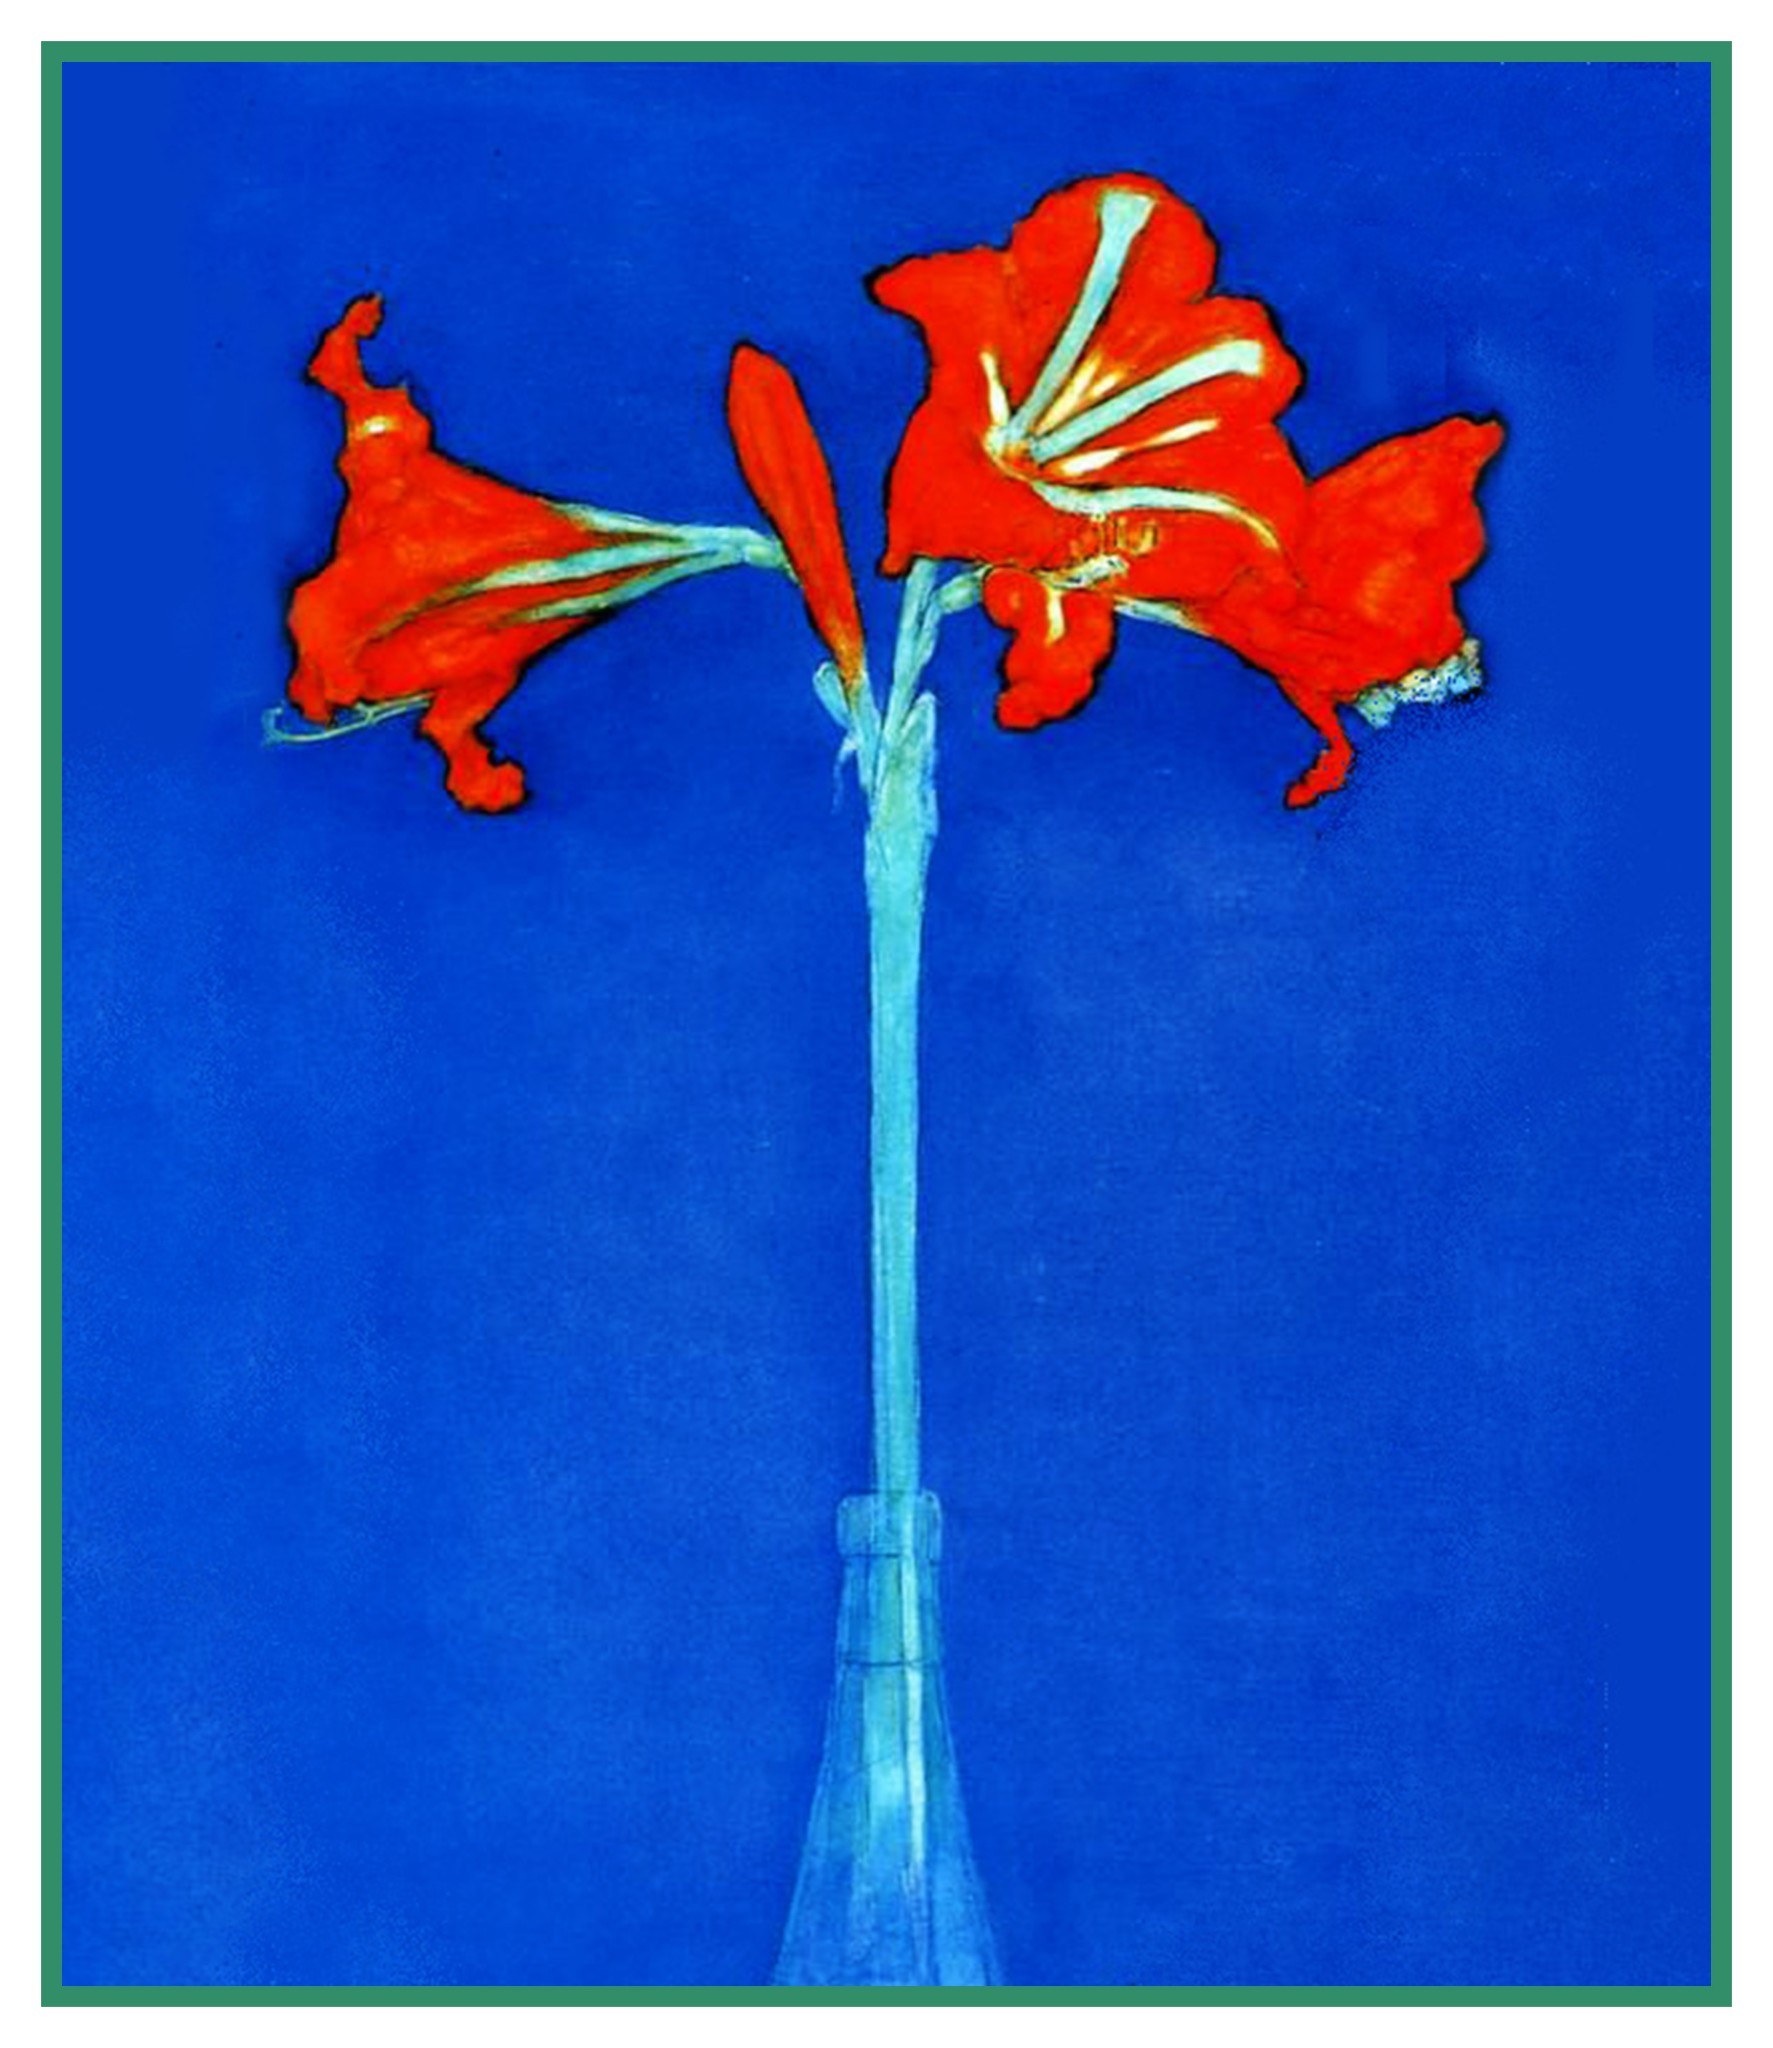 Amaryllis Flowers on Blue by Artist Piet Mondrian Counted Cross ...